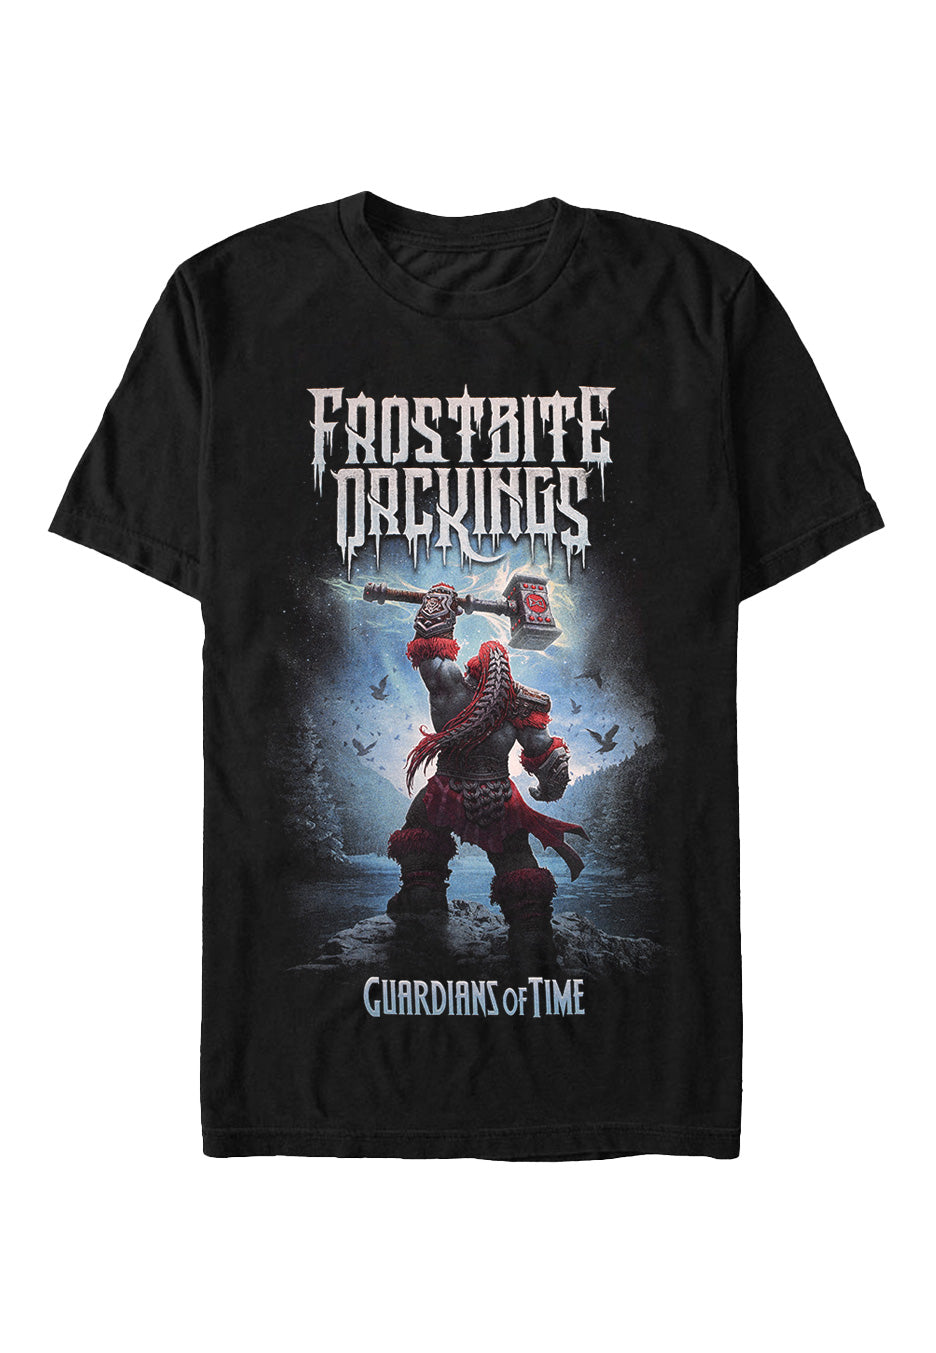 Frostbite Orckings - Guardians Of Time - T-Shirt